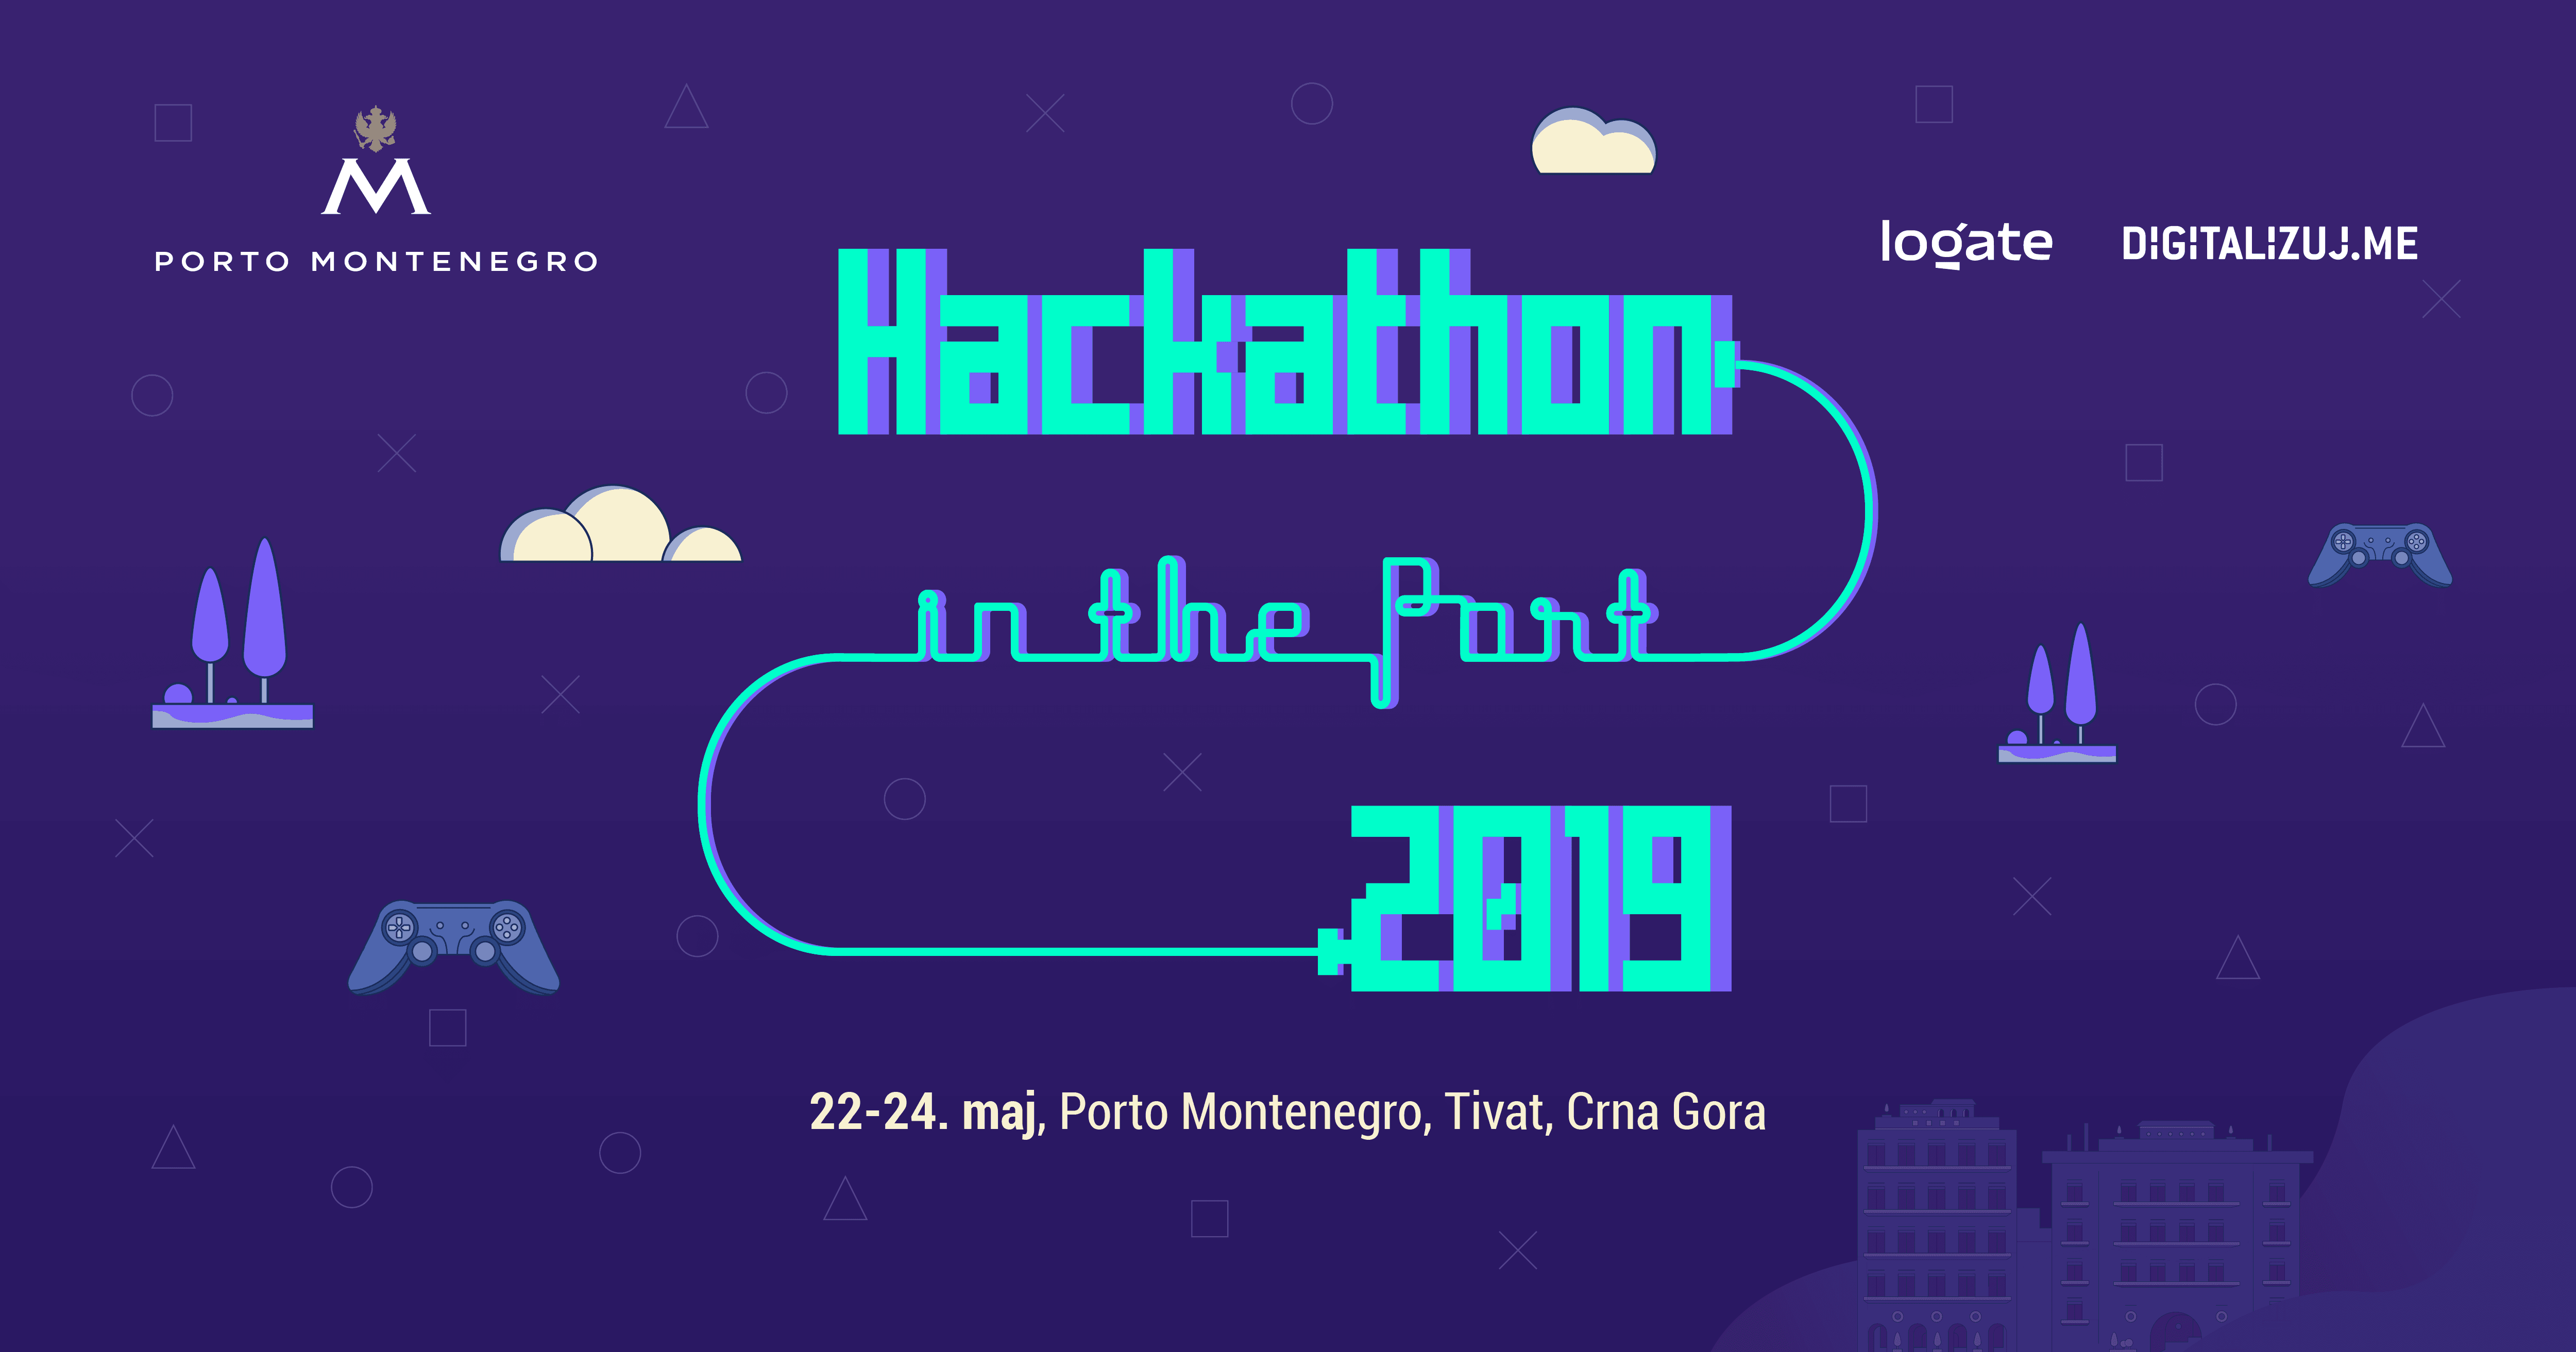 Porto Montenegro Hosts Hackaton in the Port 2019 from May 22 to 24